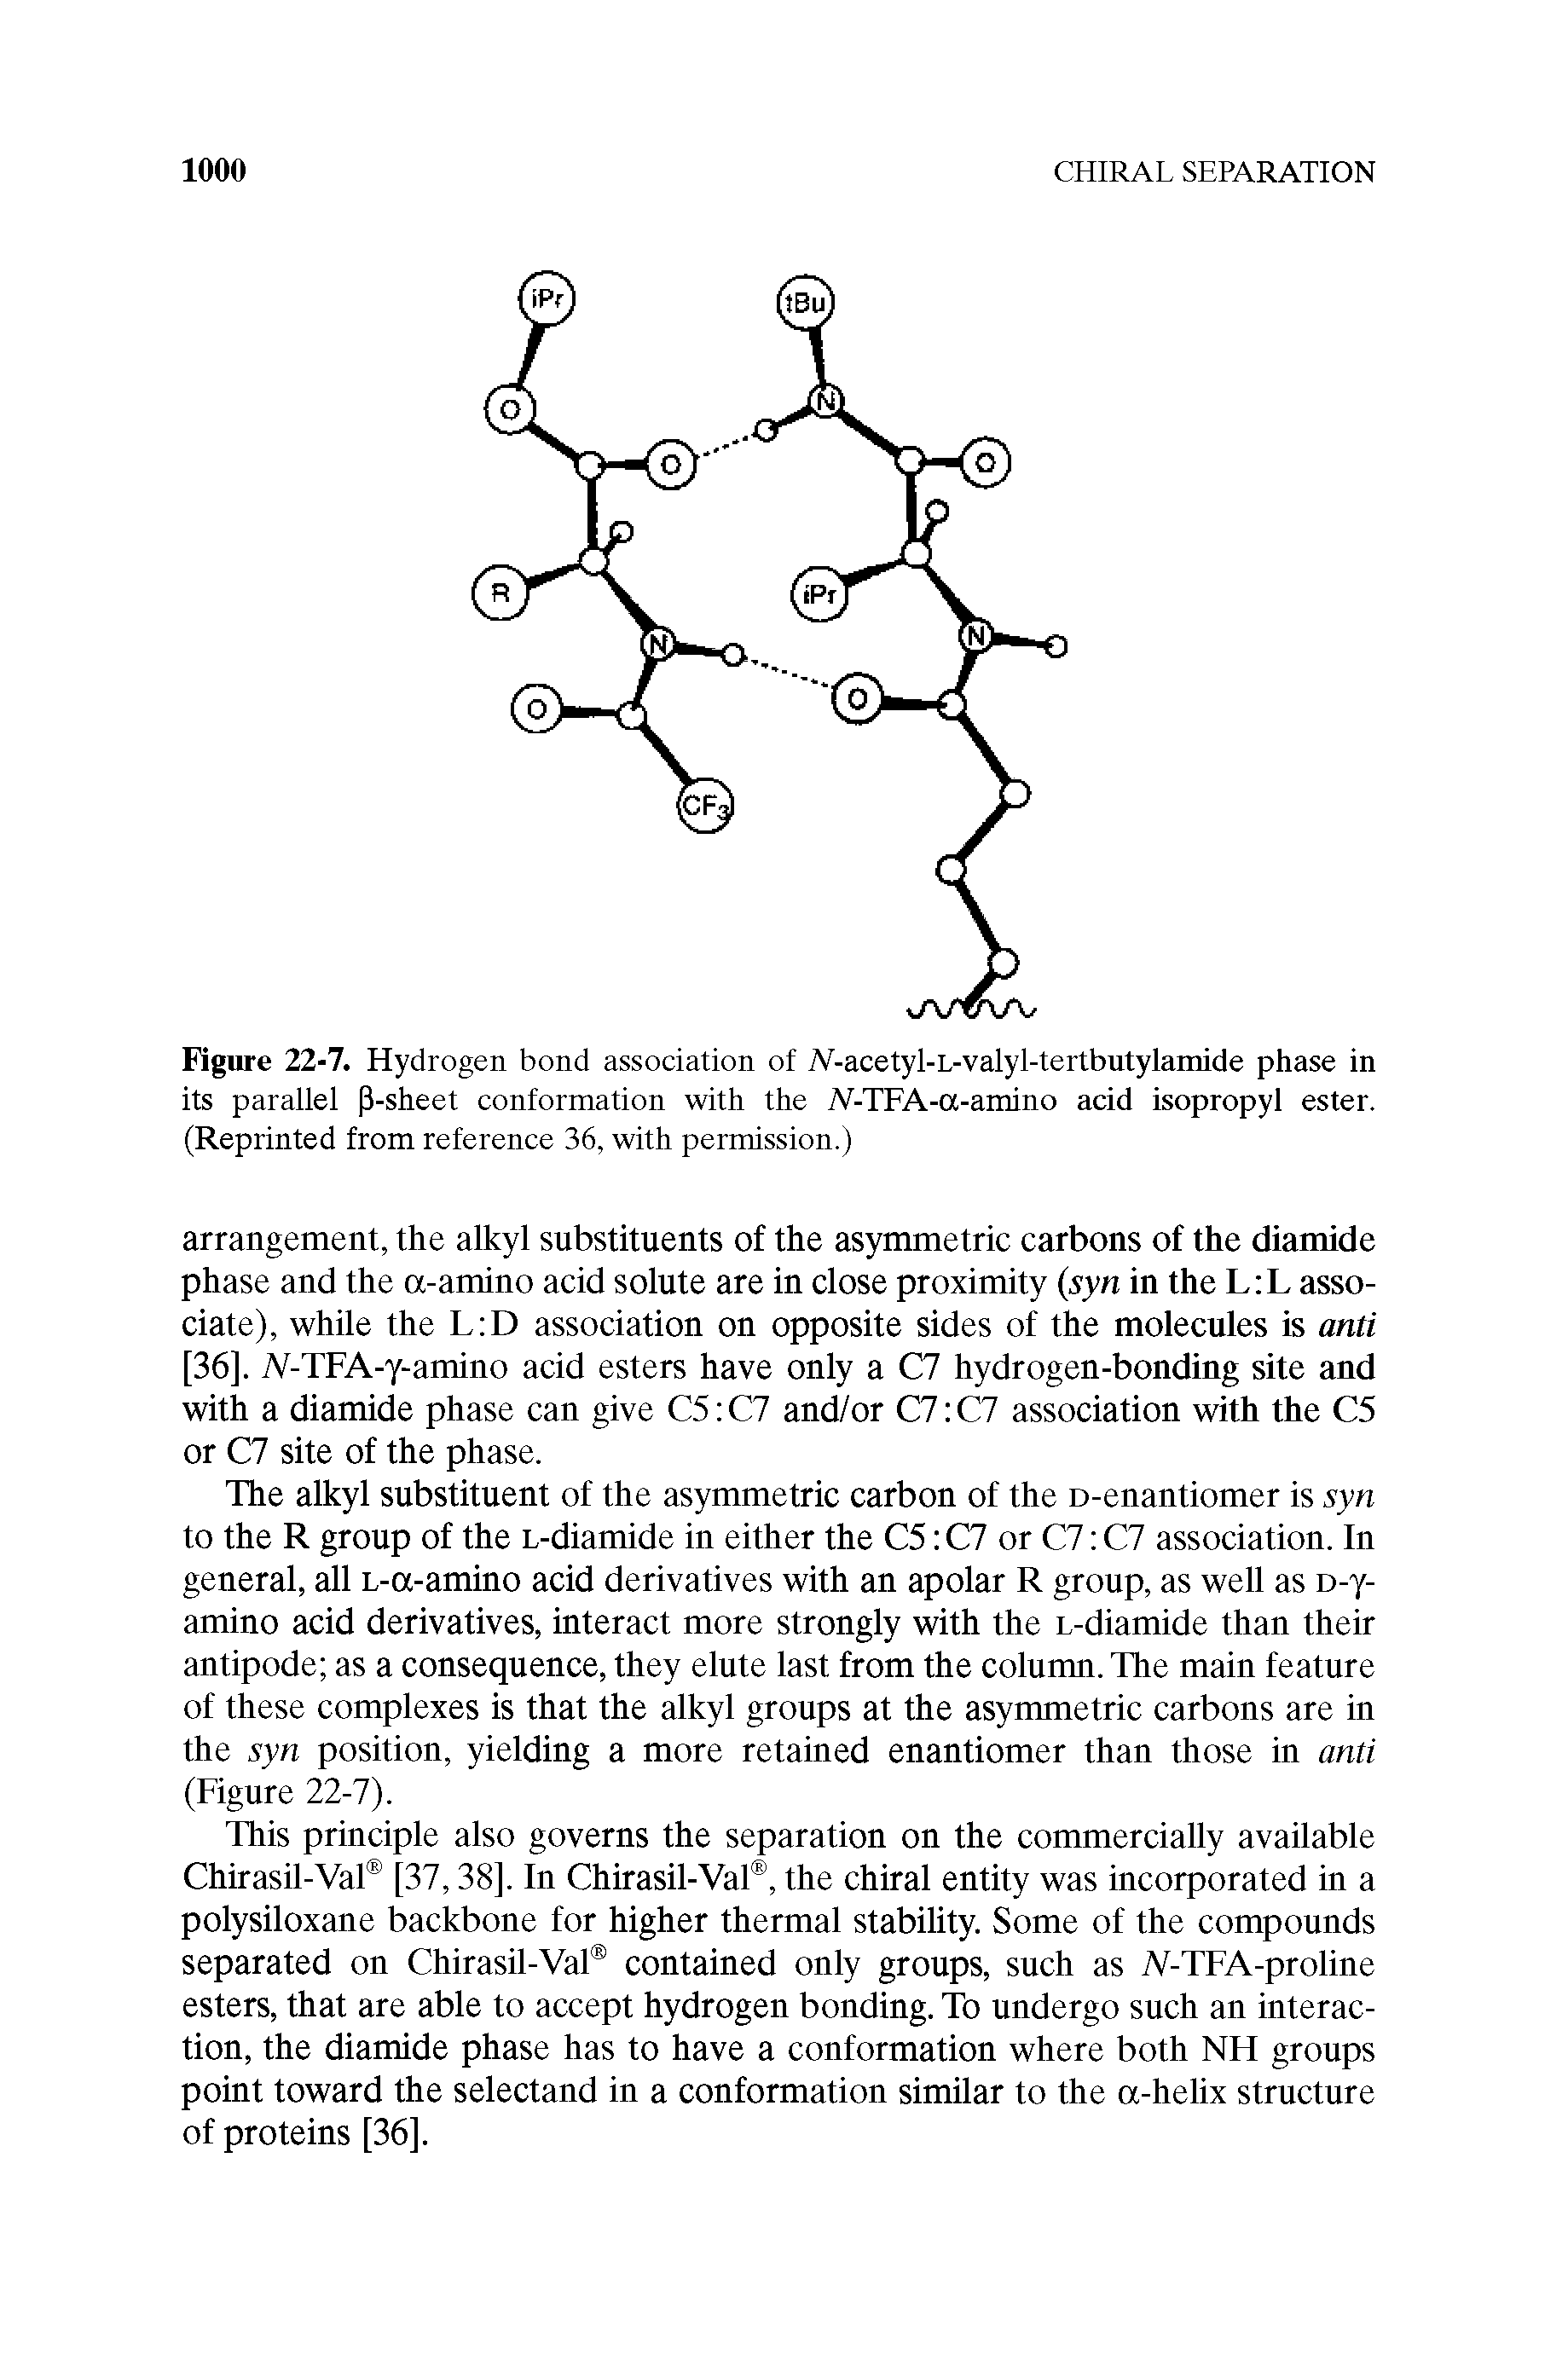 Figure 22-7. Hydrogen bond association of A -acetyl-L-valyl-tertbutylamide phase in its parallel P-sheet conformation with the Al-TFA-a-amino acid isopropyl ester. (Reprinted from reference 36, with permission.)...